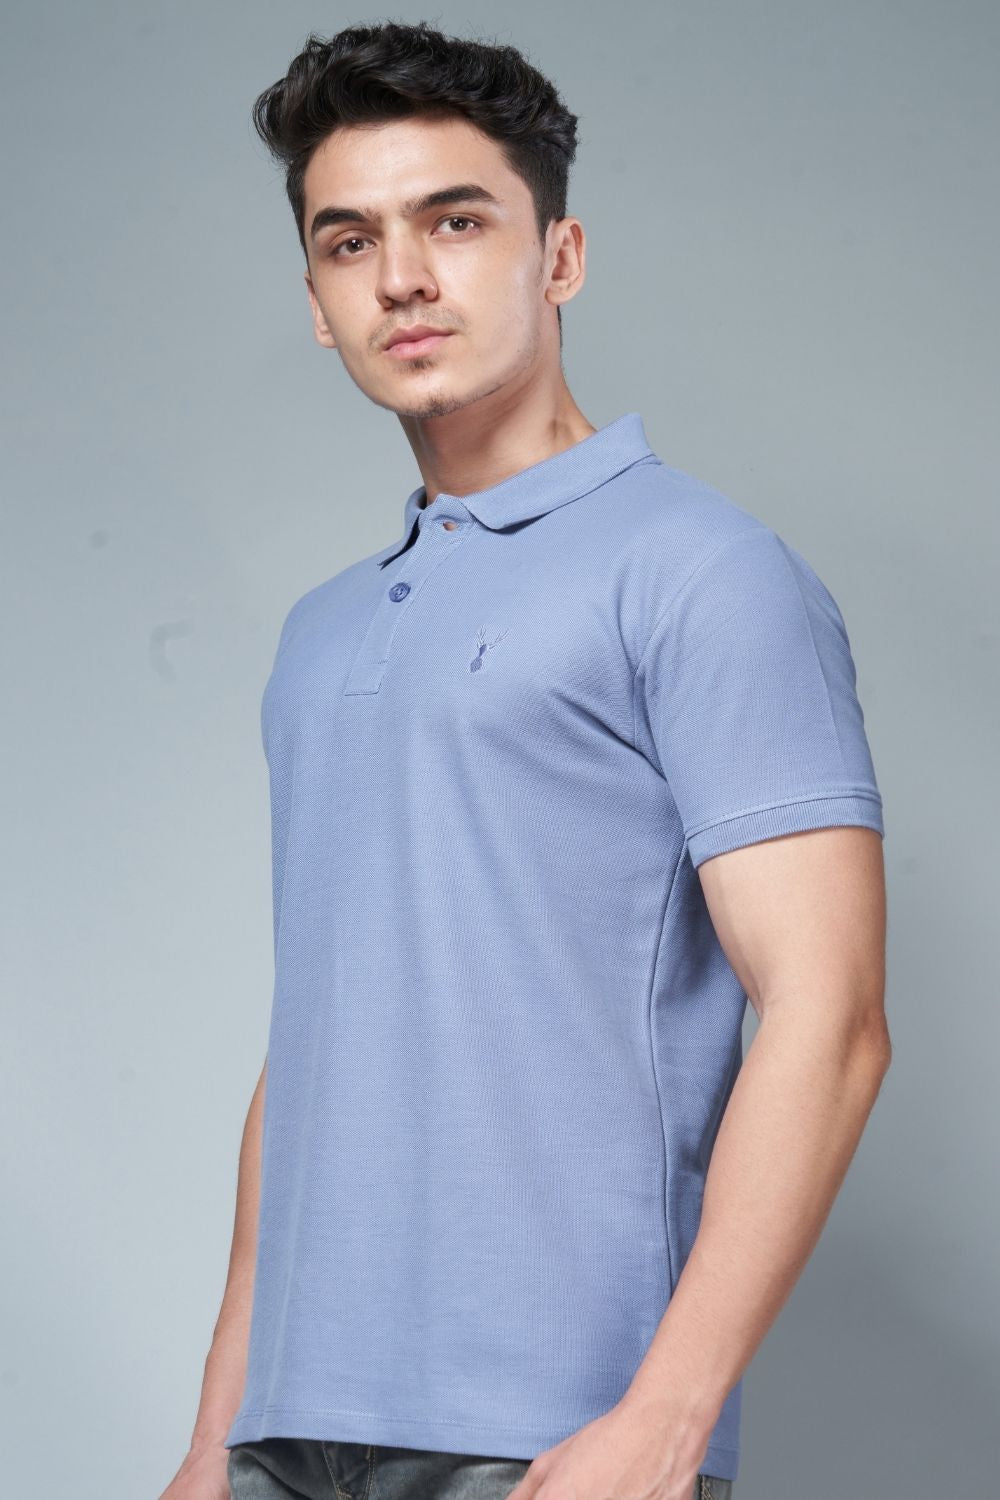 Air Blue colored, identity Polo T-shirts for men with collar and half sleeves, side view.